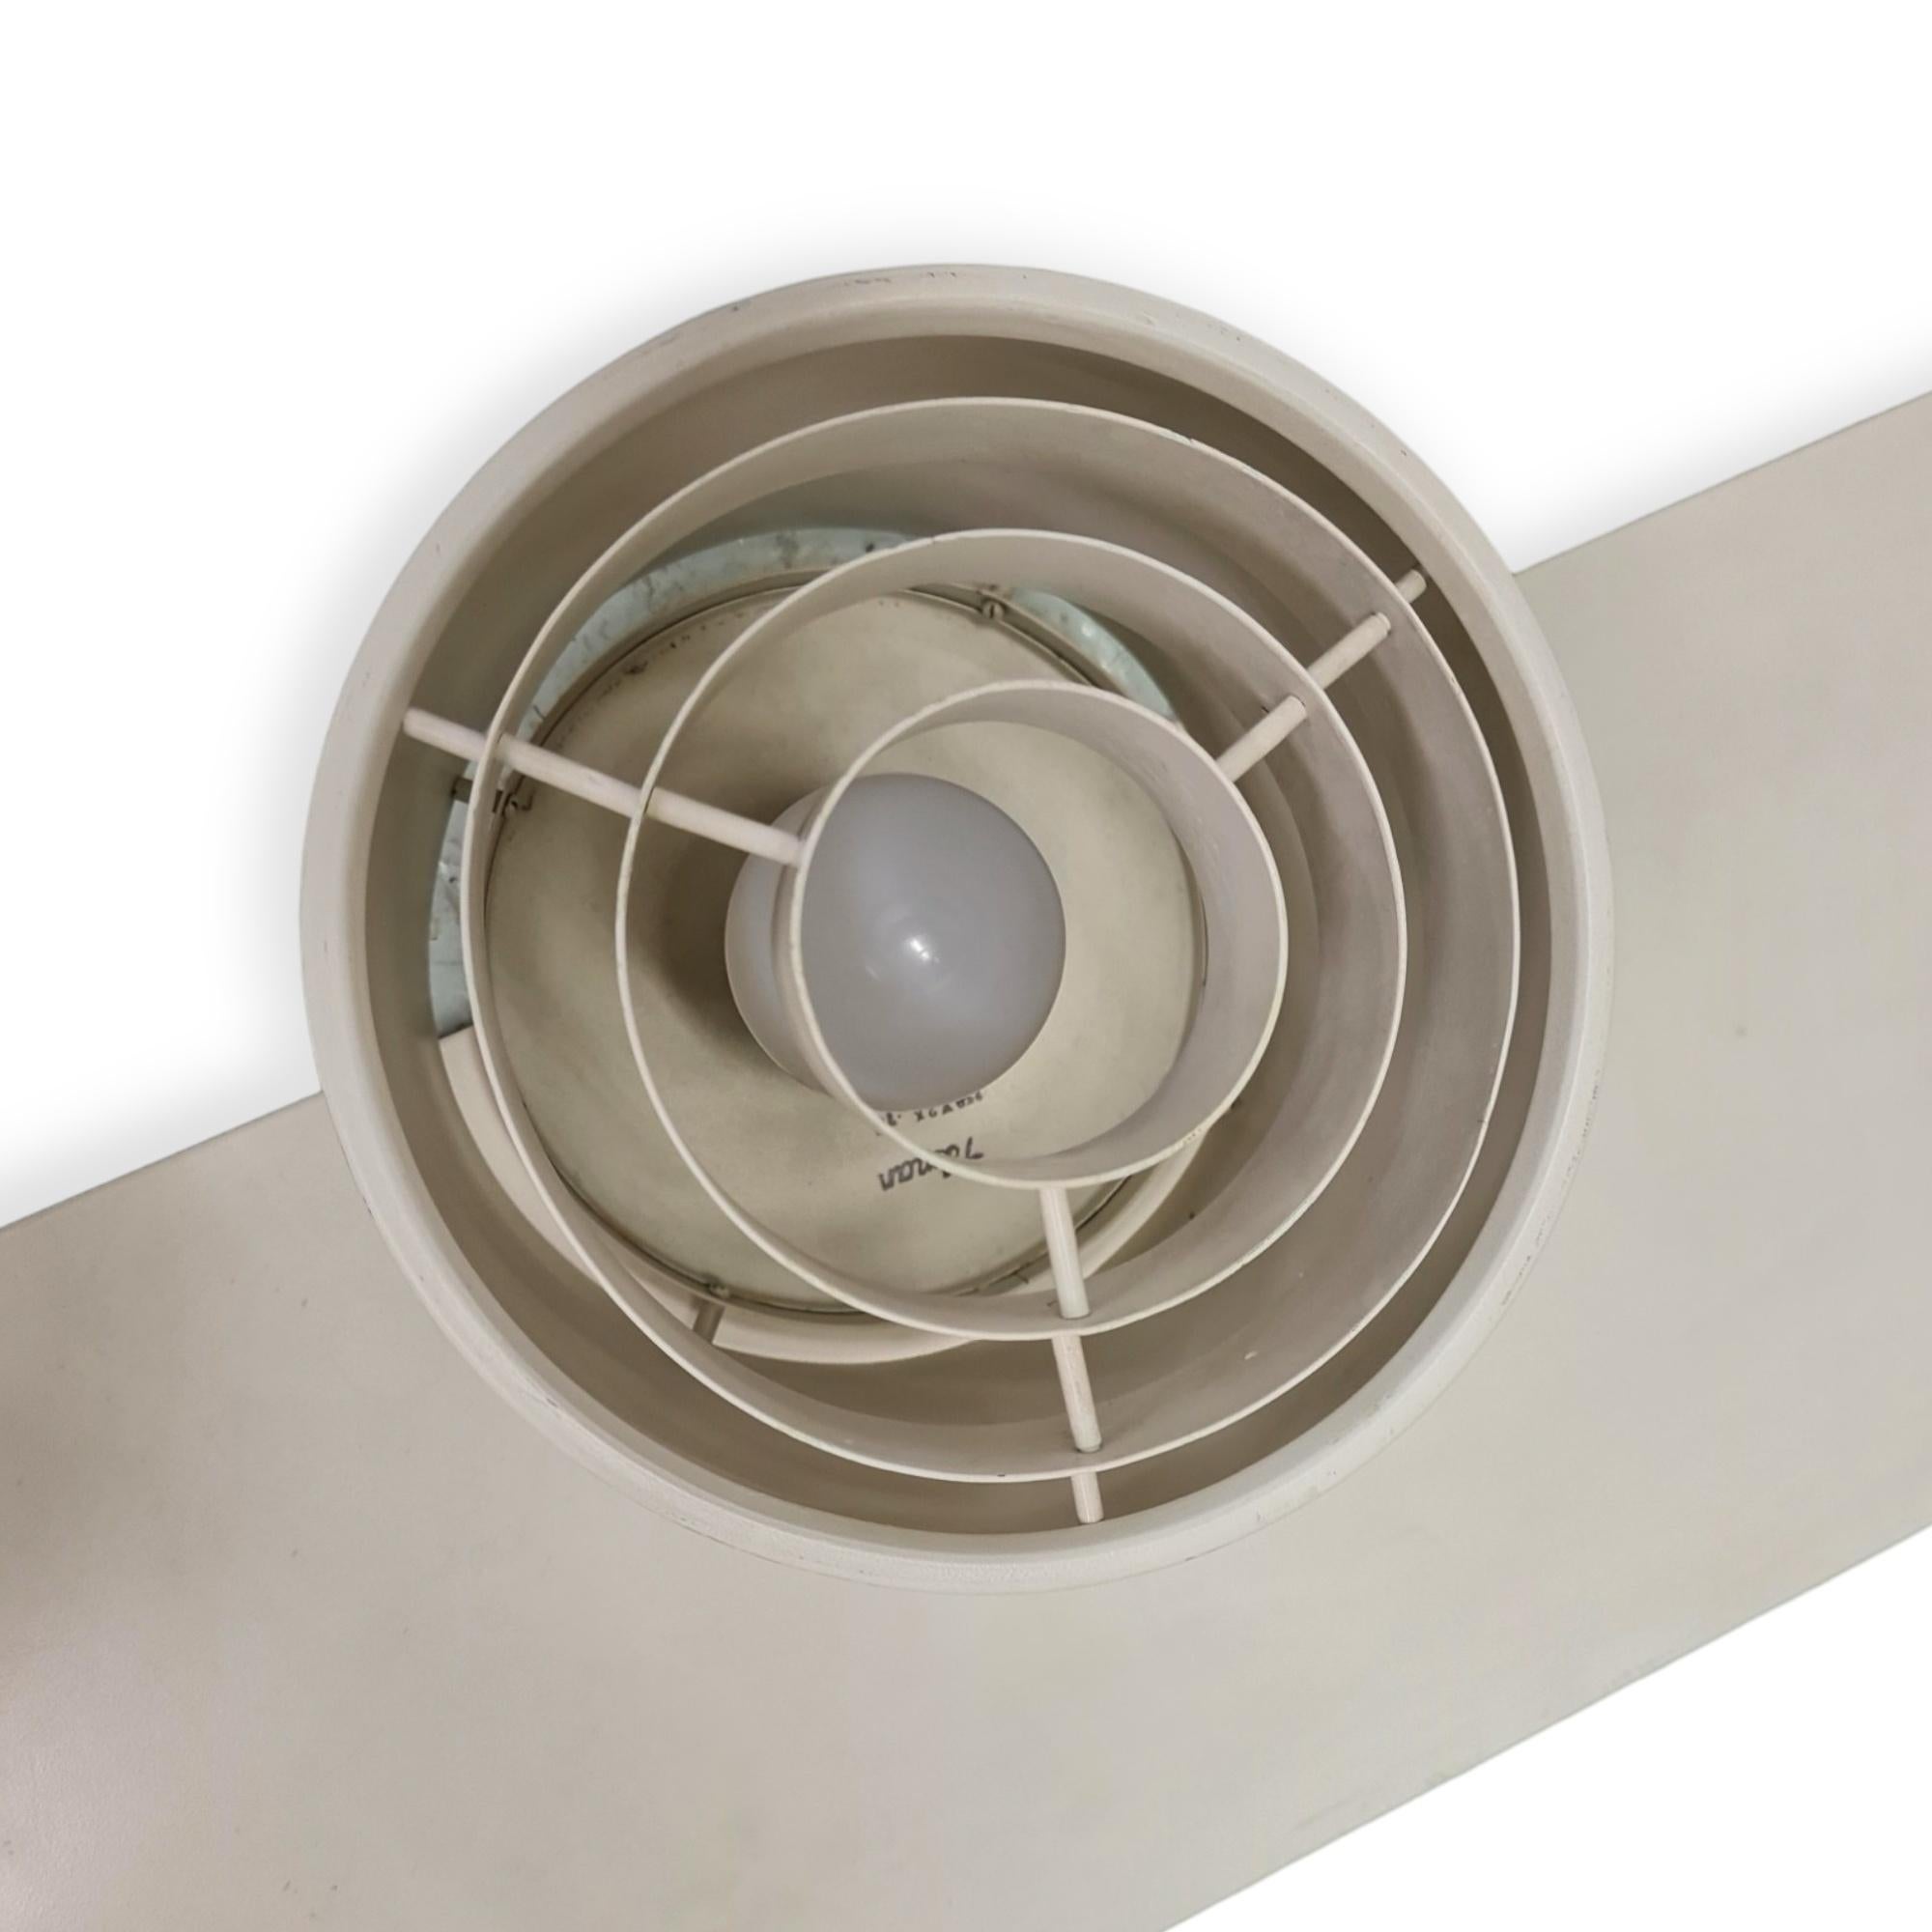 Mid-20th Century Alvar Aalto Ceiling Lamp for Stora Enso Headquarters, Idman For Sale